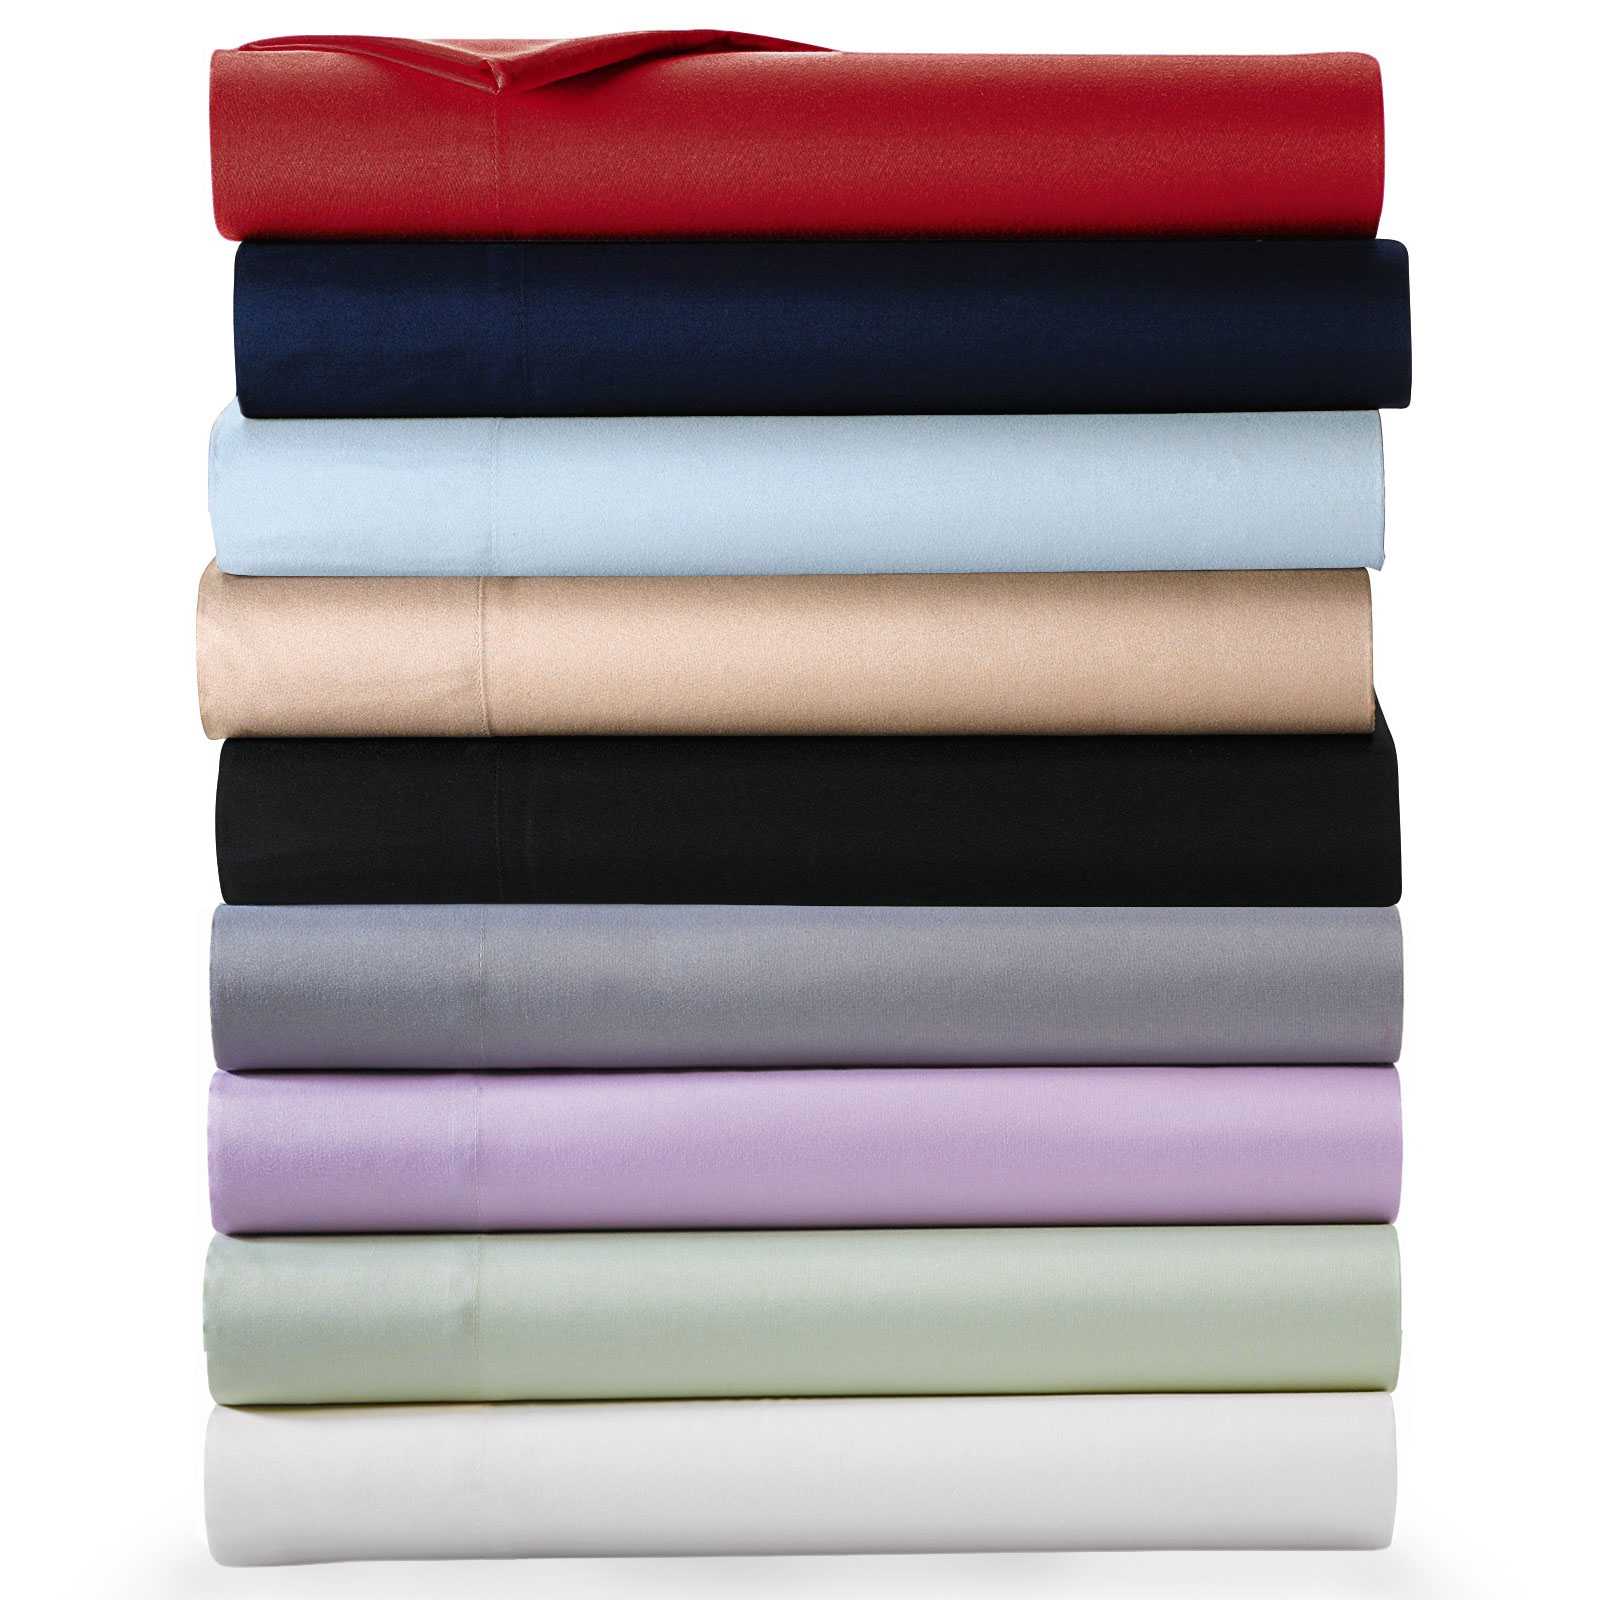 Cannon Microfiber Sheet Set From $8.99!